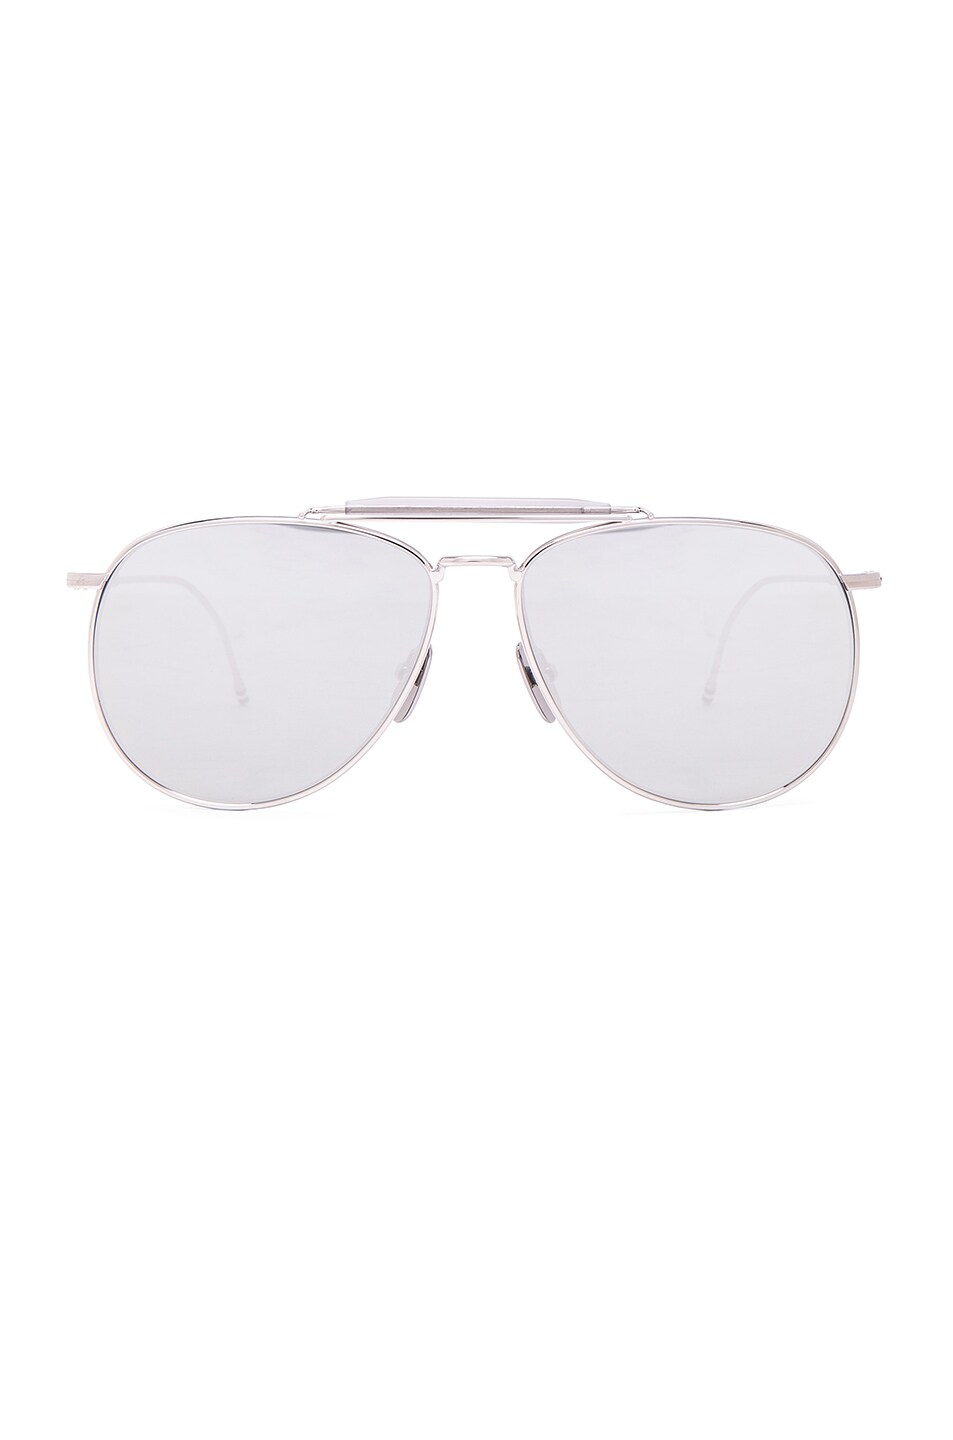 Thom Browne Limited Edition Mirrored Aviator in Silver | FWRD